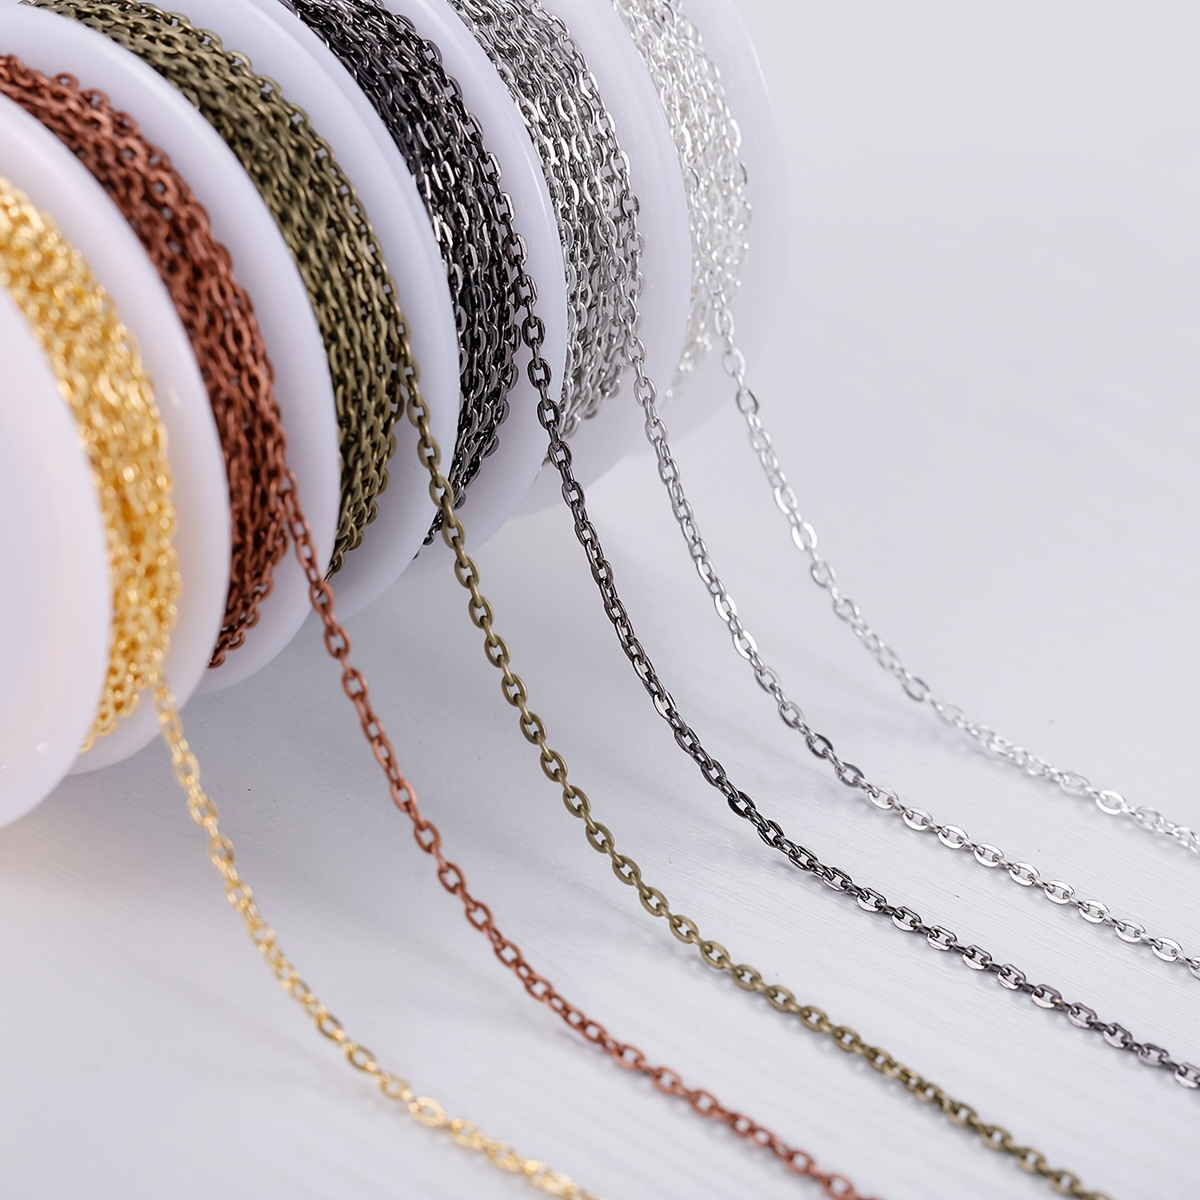 Jishi 80ft Necklace Chains Jewelry Making Chain Link Rolls Bulk 2mm -  Bracelet Earring Necklace Craft Supplies DIY Jewelry Making Findings,  8-Colors